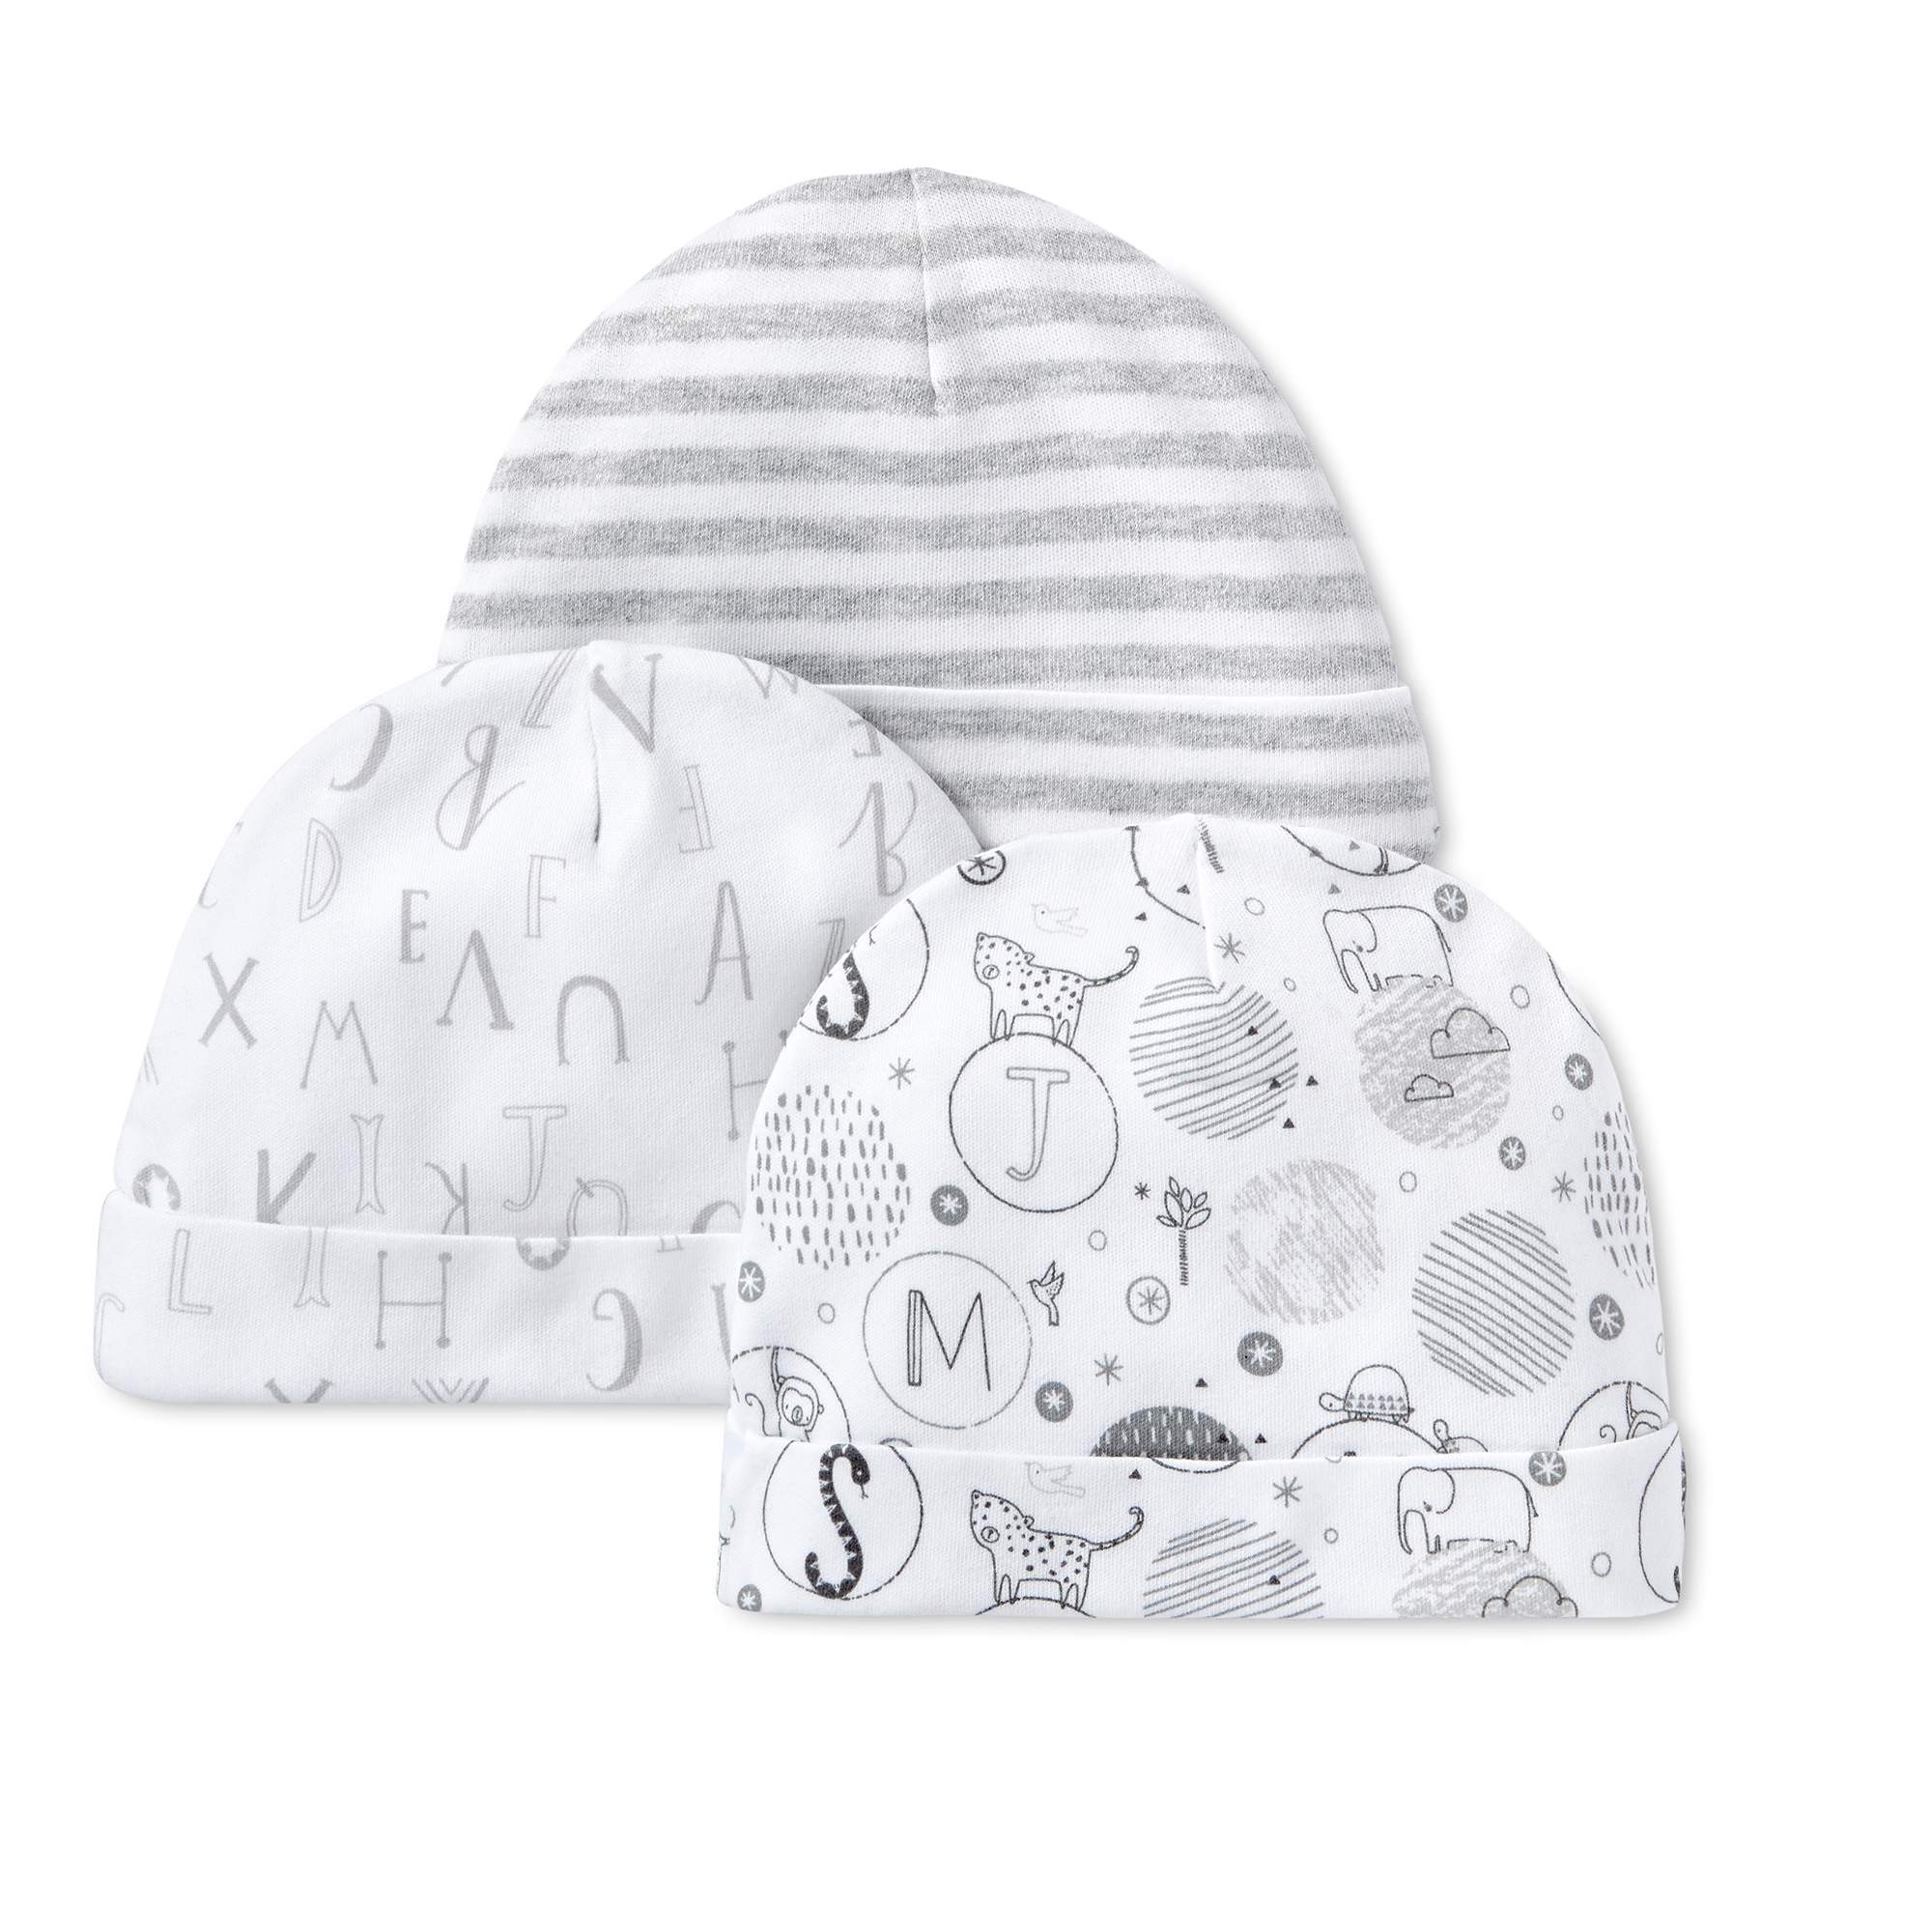 Lamaze Baby Boy or Girl Gender Neutral Caps, 3-Pack - image 1 of 4